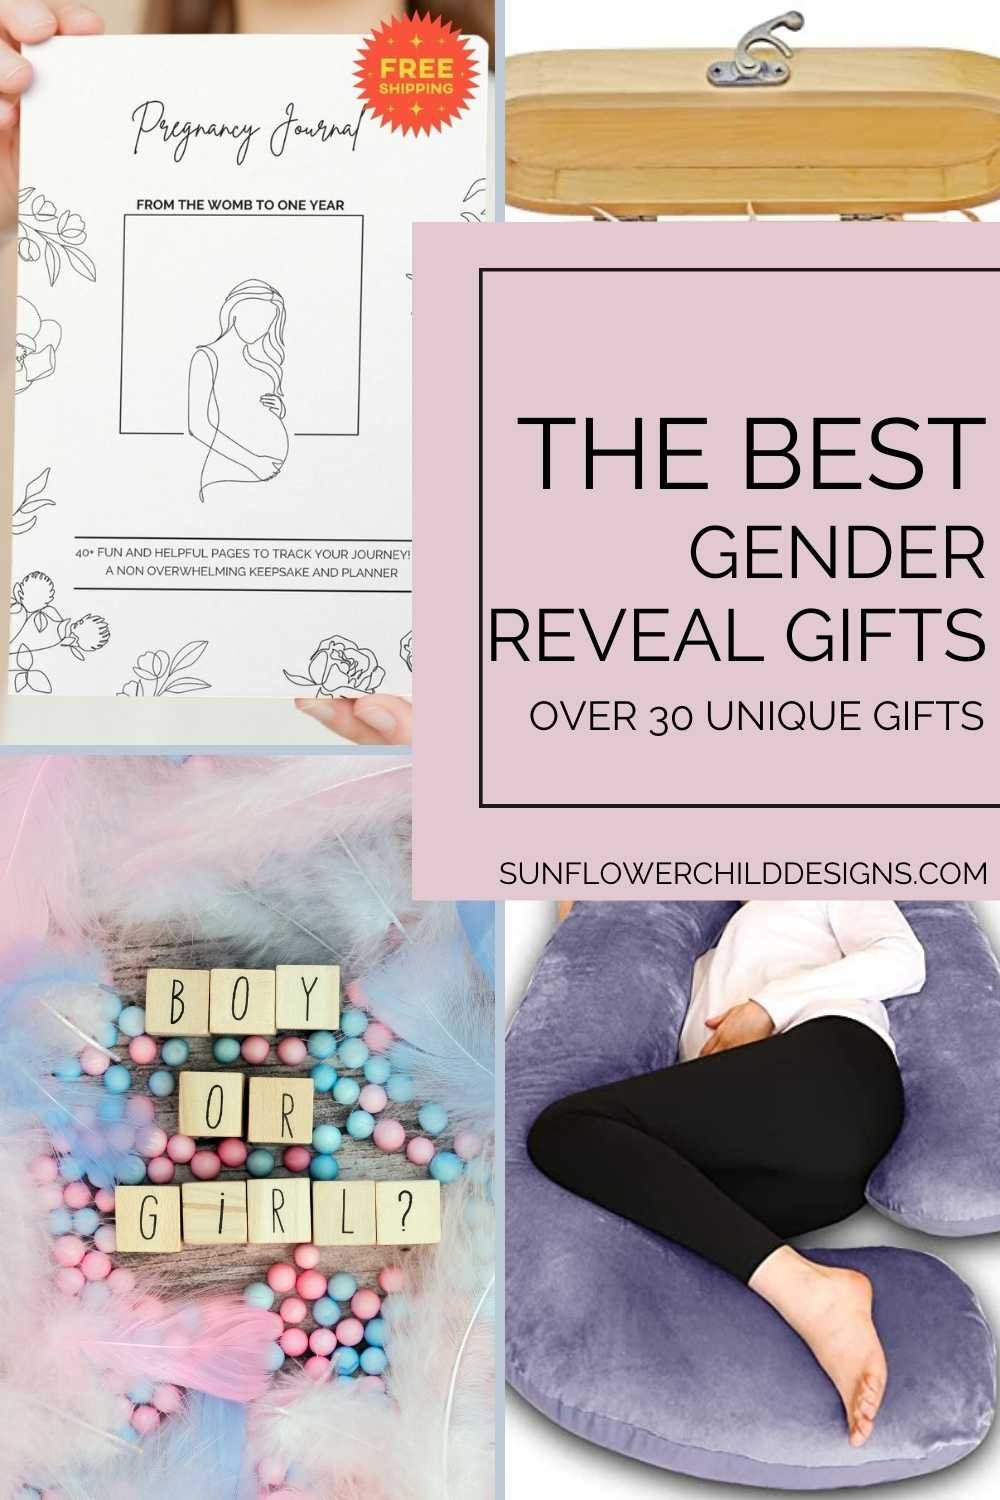 Unveiled: The Least Wanted Gender Reveal Gifts